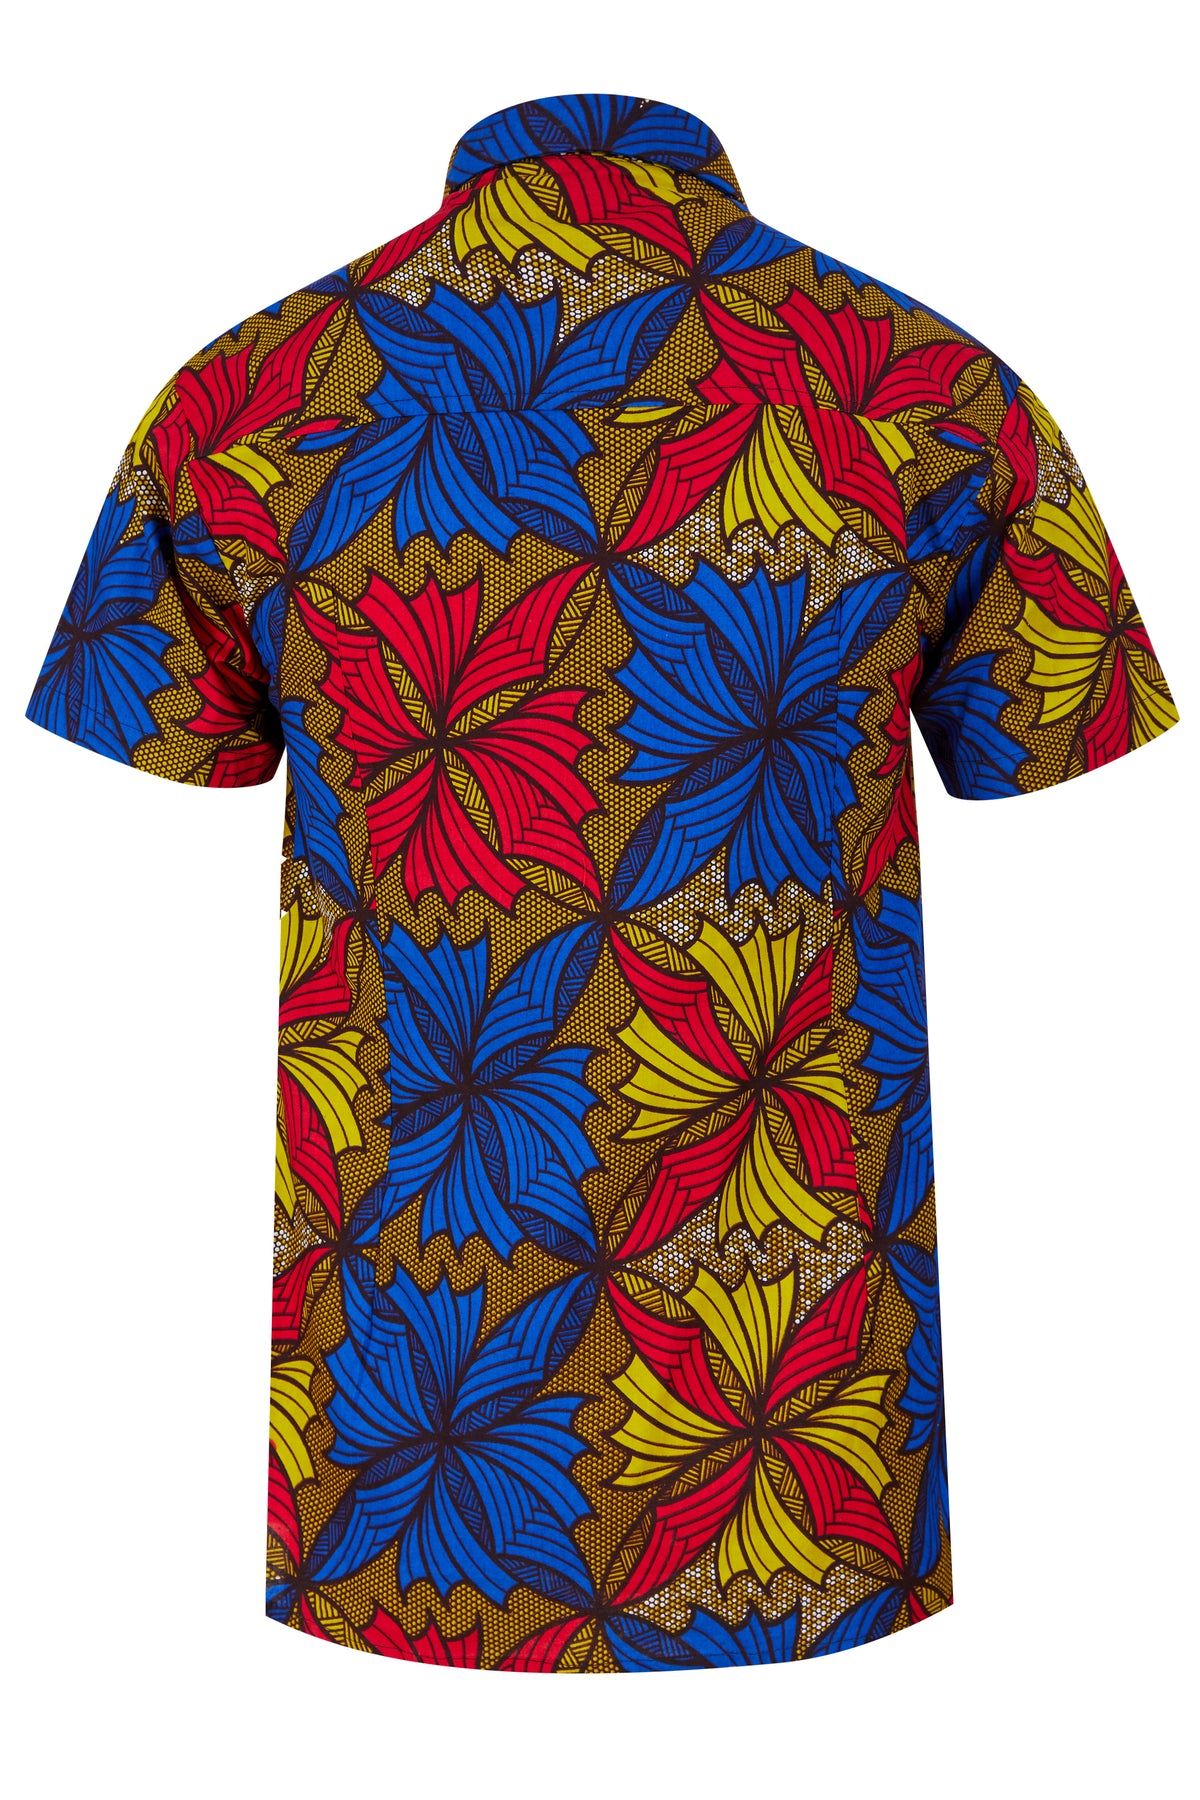 Men's short sleeve shirt 3D Floral - OHEMA OHENE AFRICAN INSPIRED FASHION